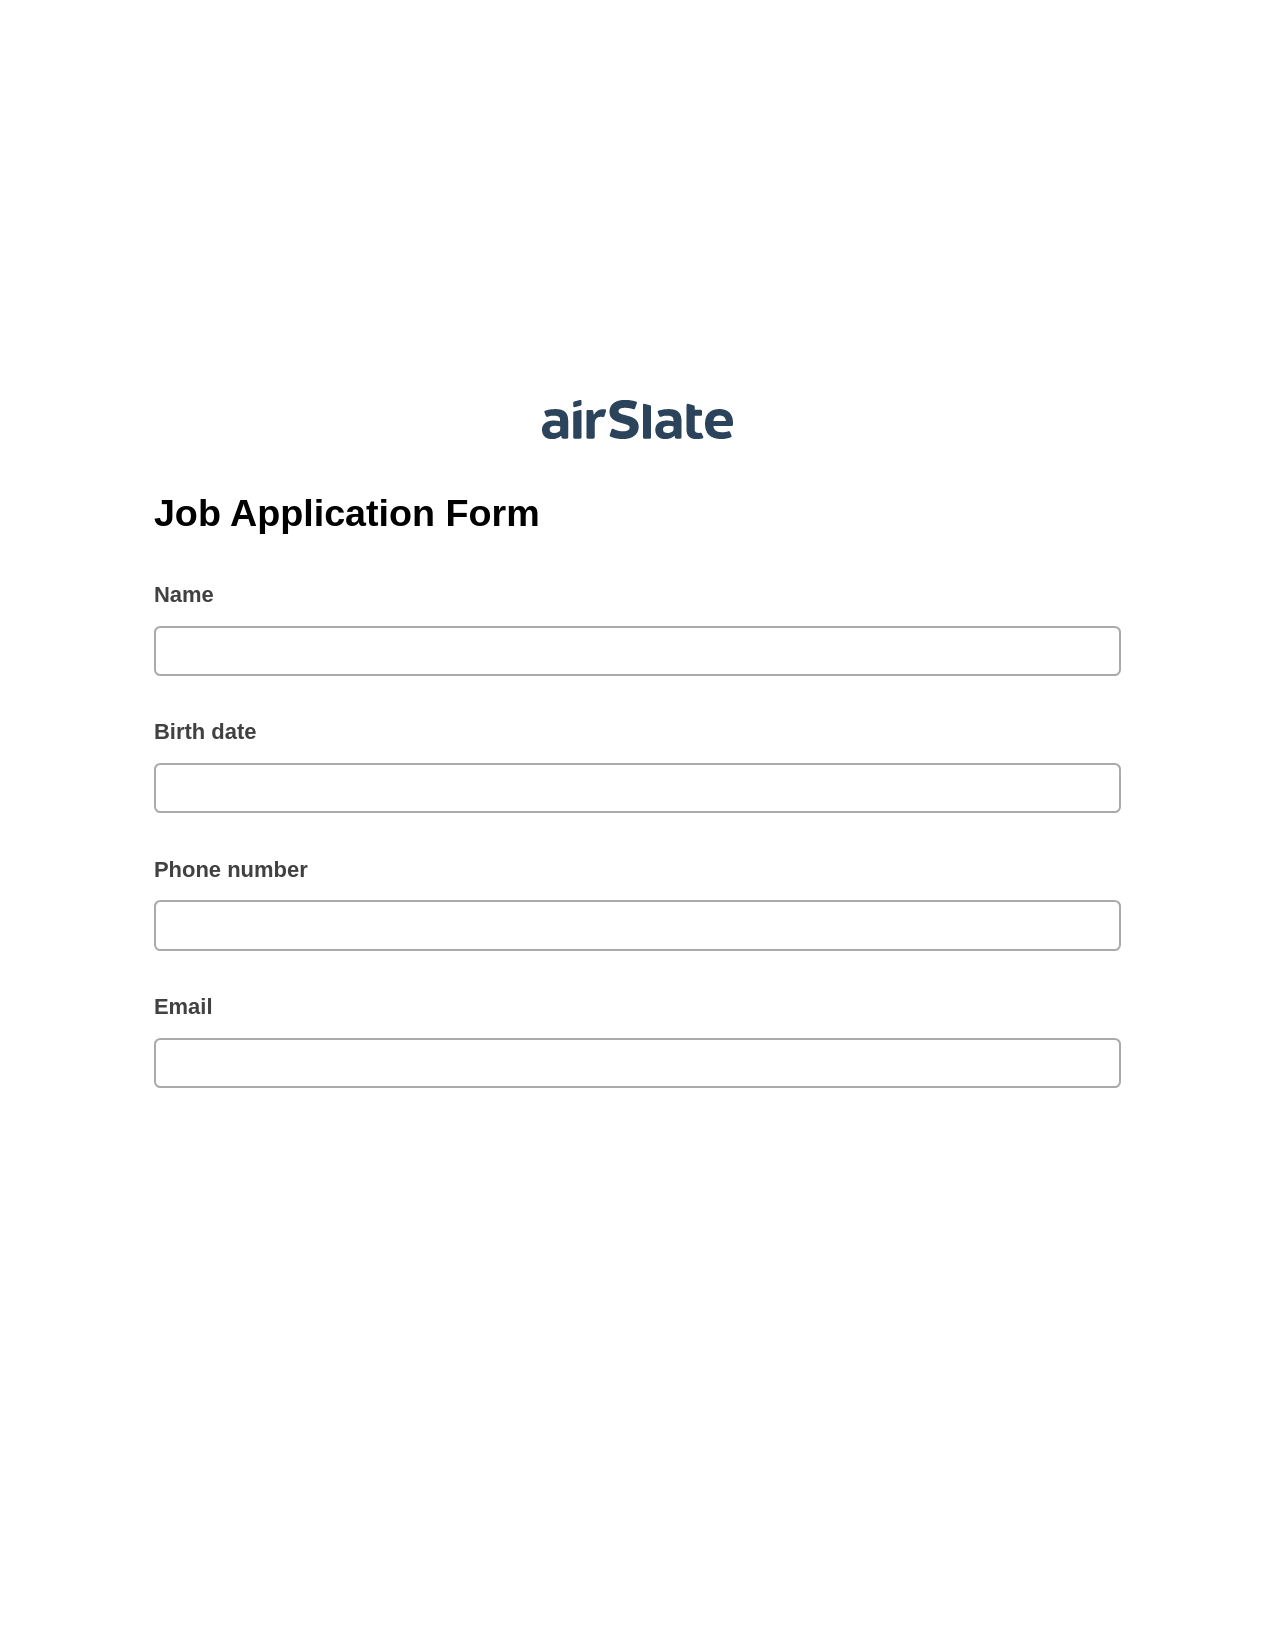 Multirole Job Application Form Pre-fill from Salesforce Record Bot, Create slate addon, Export to Google Sheet Bot